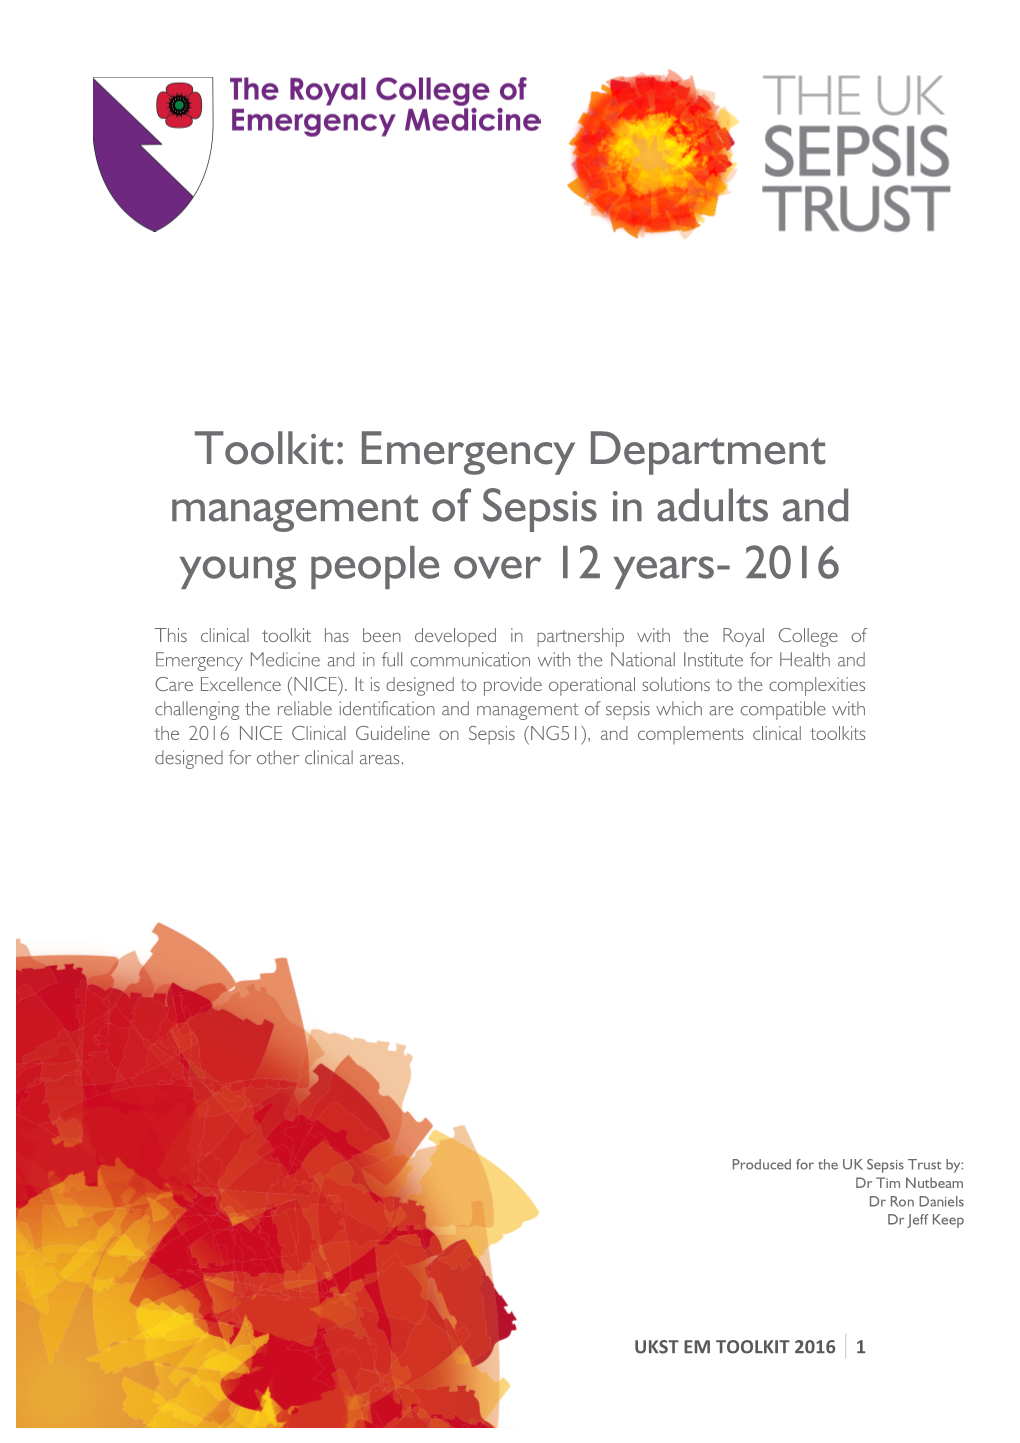 Toolkit: Emergency Department Management of Sepsis in Adults and Young People Over 12 Years- 2016